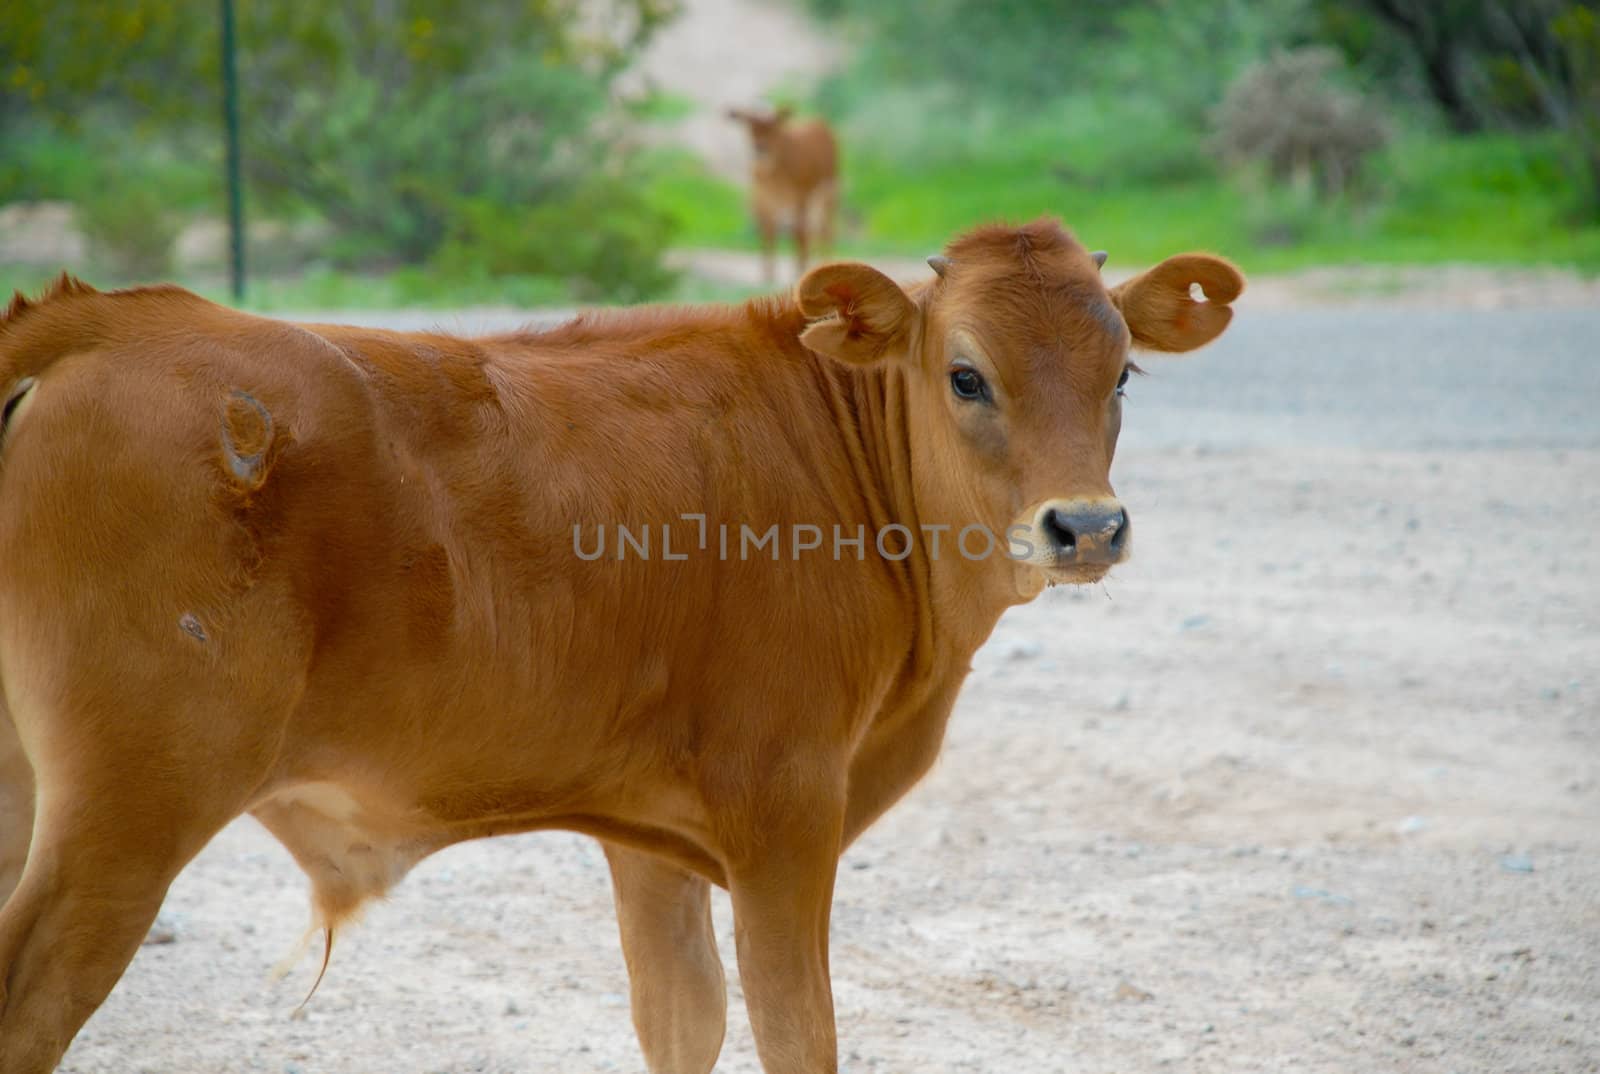 Calf by trunion